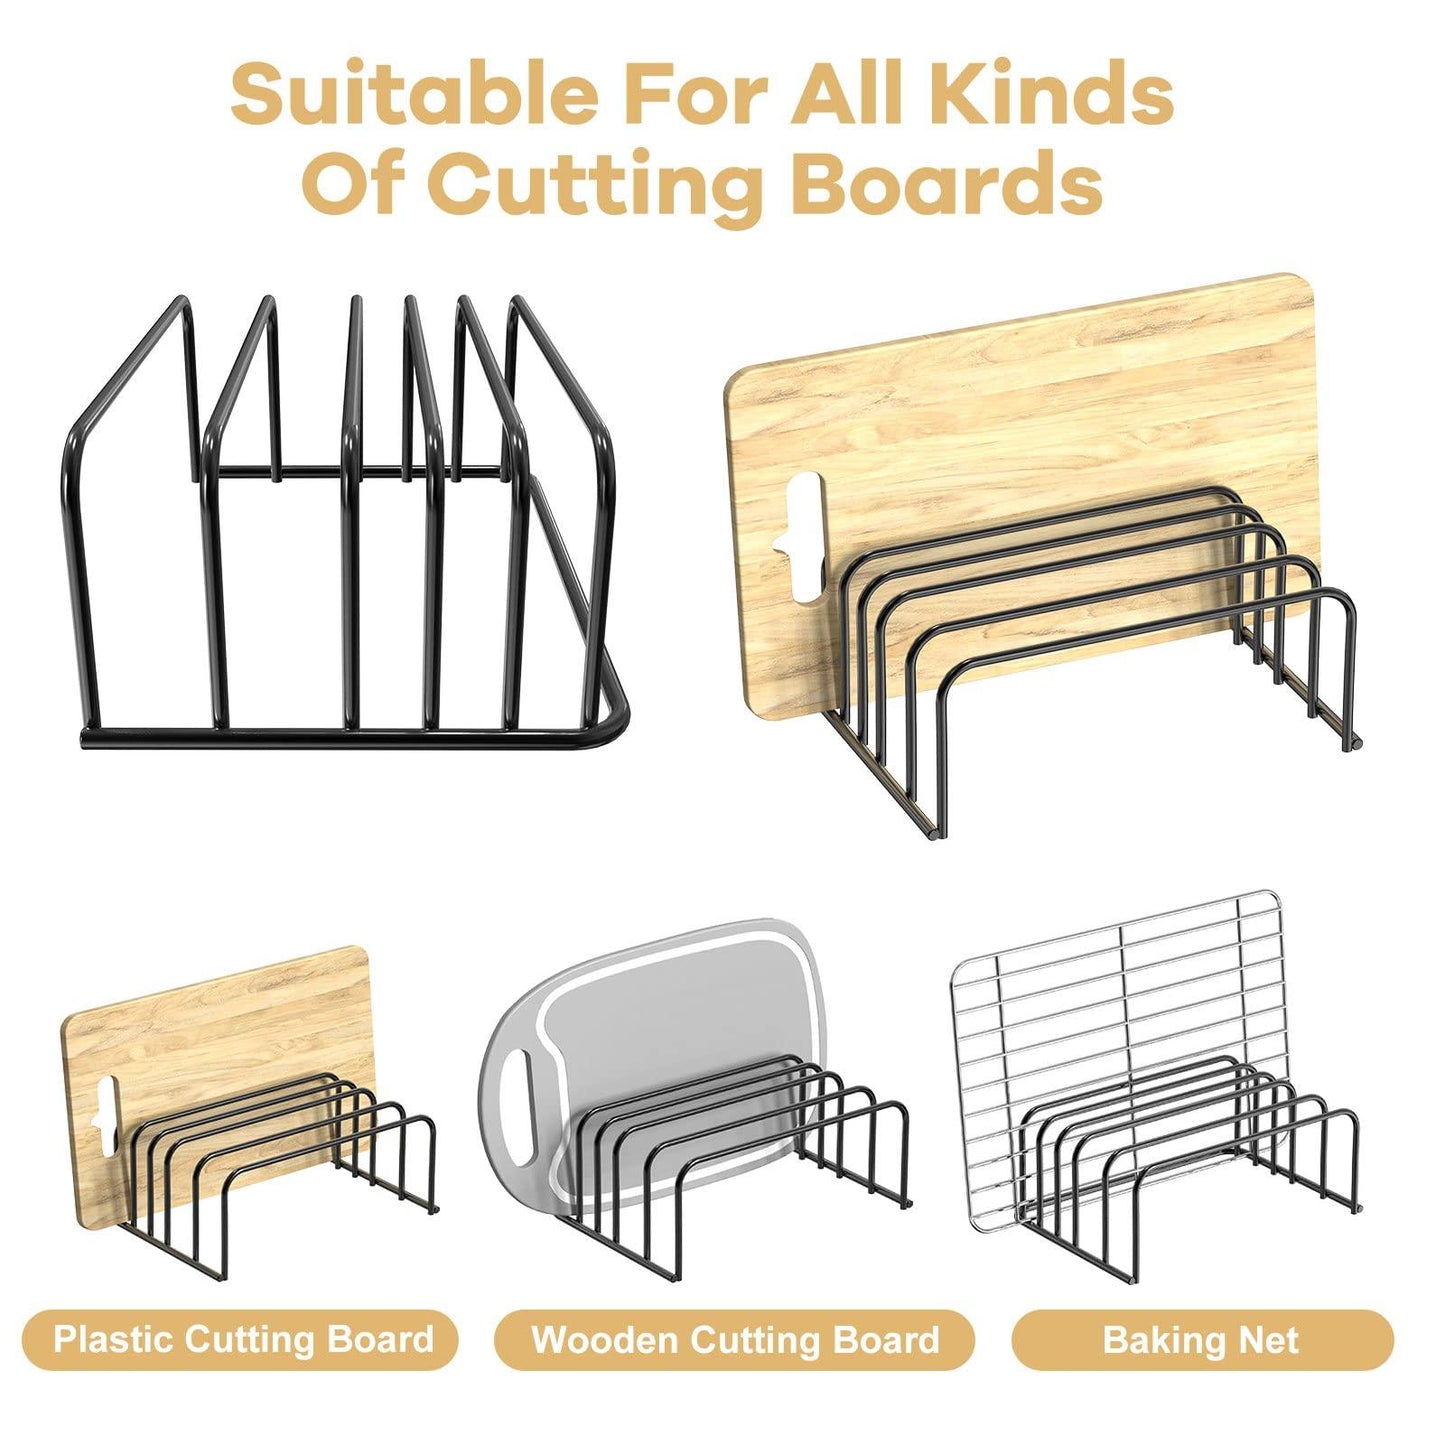 Fikoksol Cutting Board Organizer, [2-Pack] Cutting Board Holder Rack Baking Cookie Pan Sheets Cooling Small Racks Storage Stand for Kitchen Cabinet Countertop Bakeware Storage Organizer Metal Black - CookCave